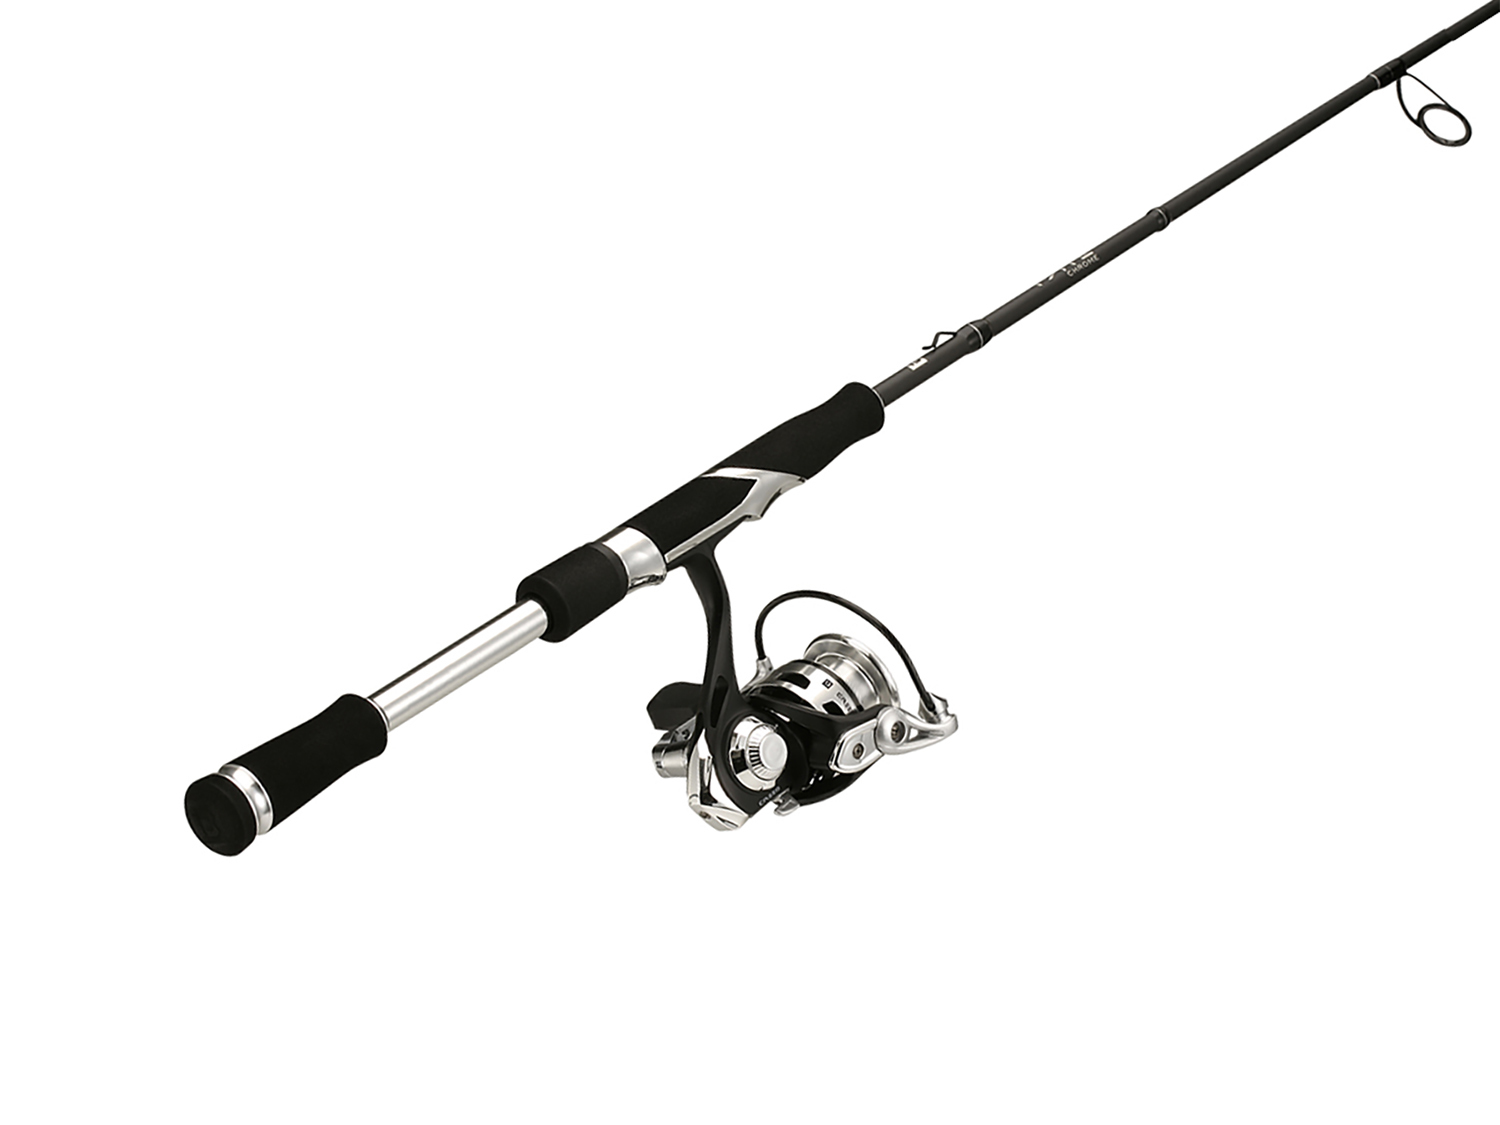 13 Fishing Creed 30 CHROME 3000 Spinning Reel 9 Brg 5.2:1